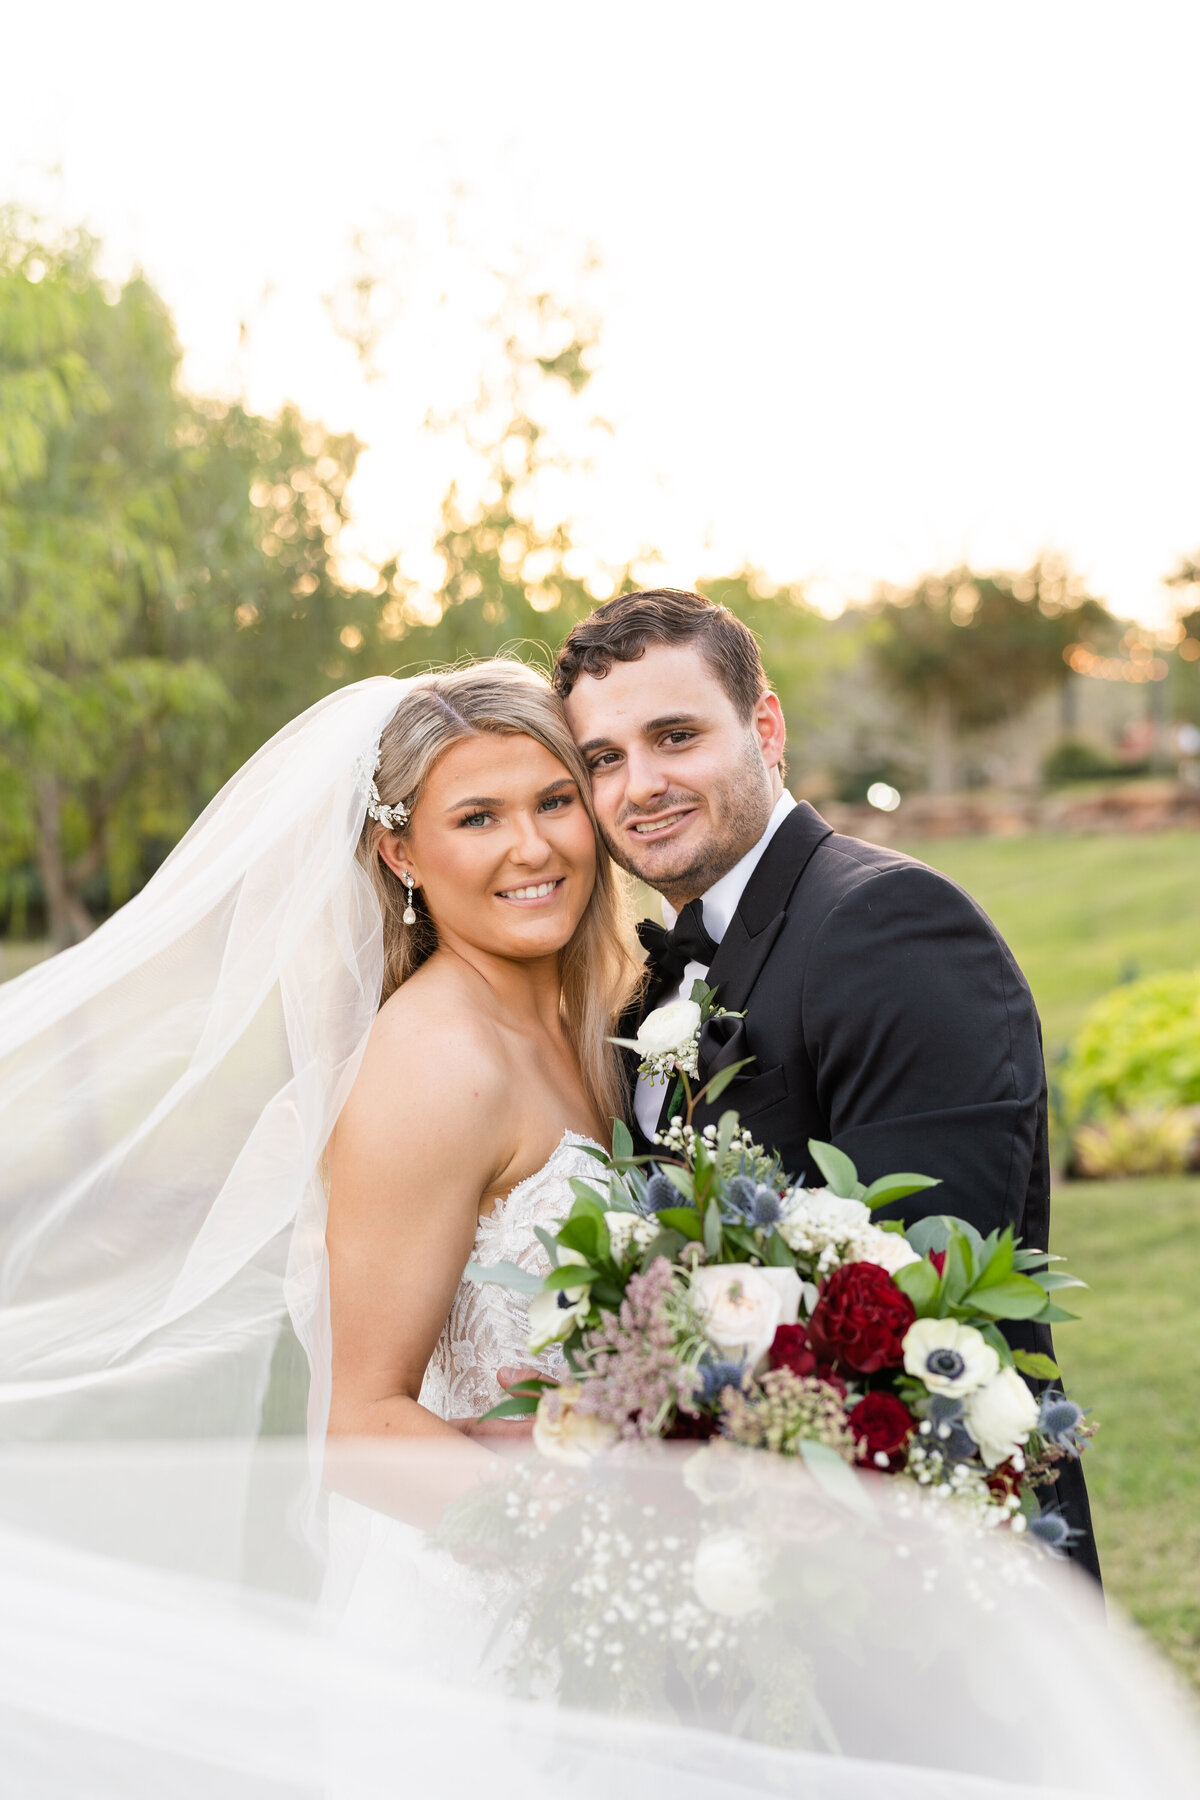 Bride and Groom hugging each other and smiling at camera with large bouquet and veil in front of camera after ceremony during couples sunset photos at the Springs Wallisville